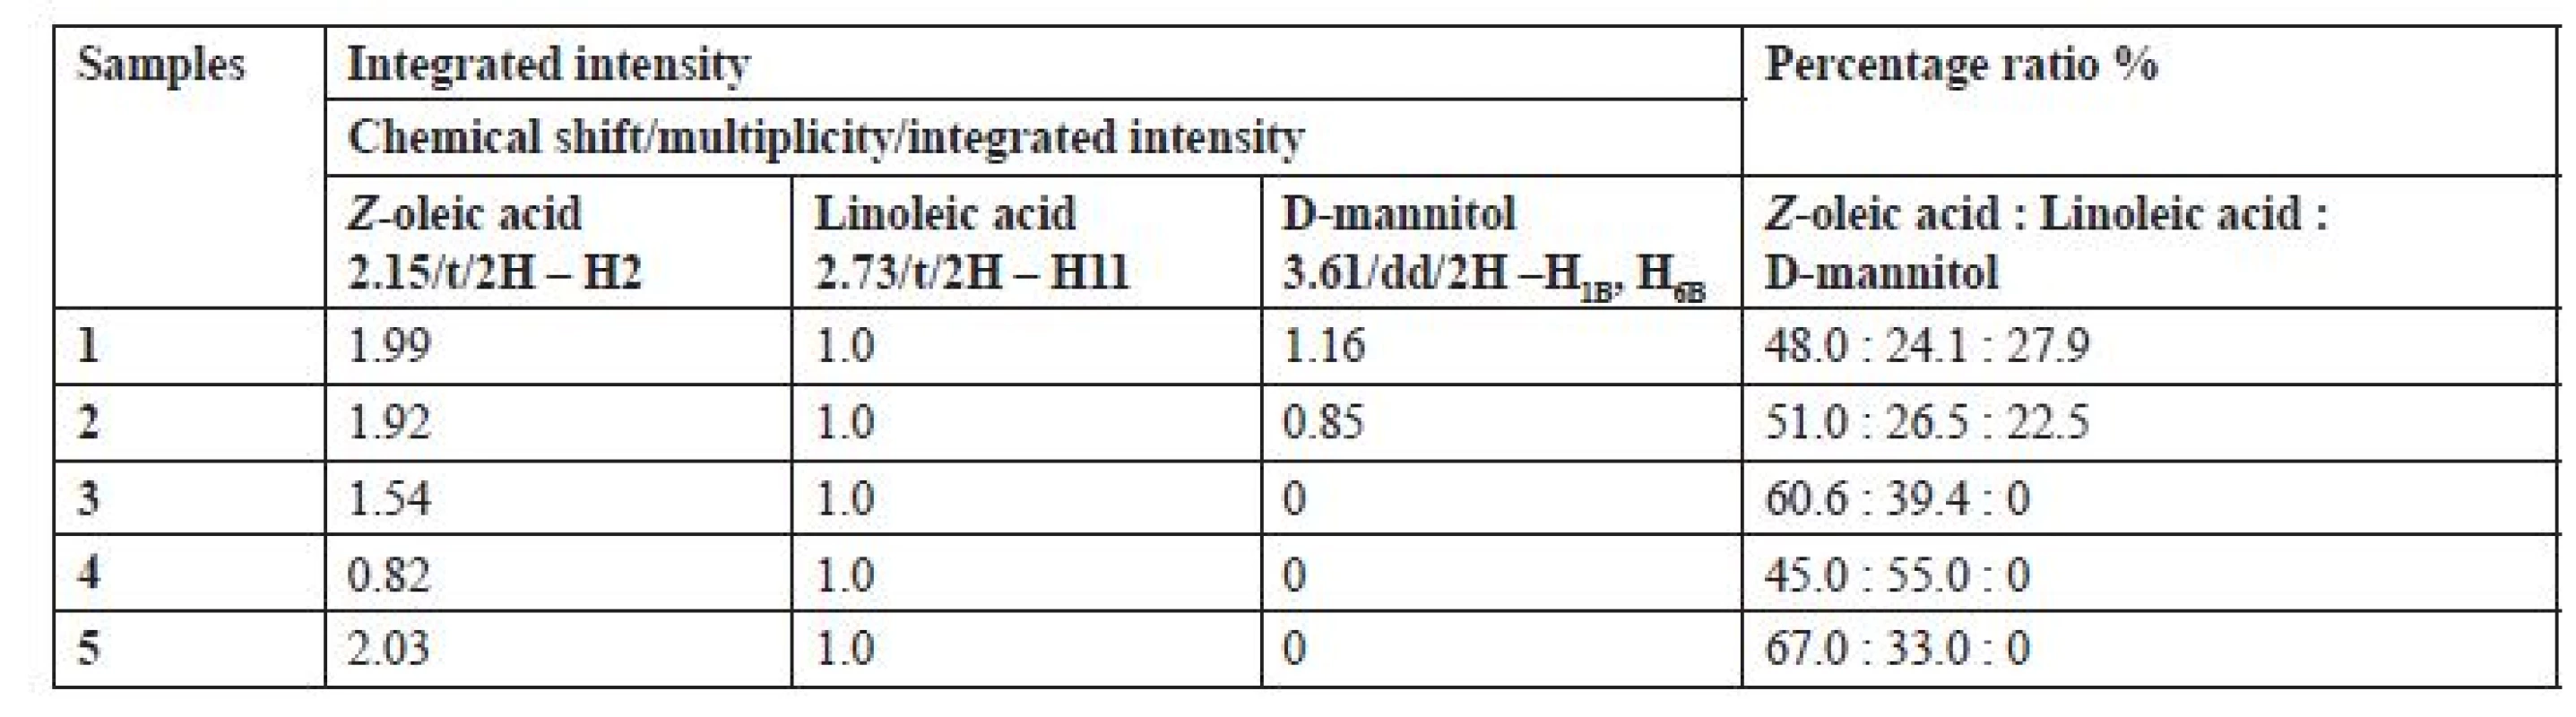 Integrated intensity and percentage of Z-oleic acid, linoleic acid and D-mannitol in samples of extracts 1‒5